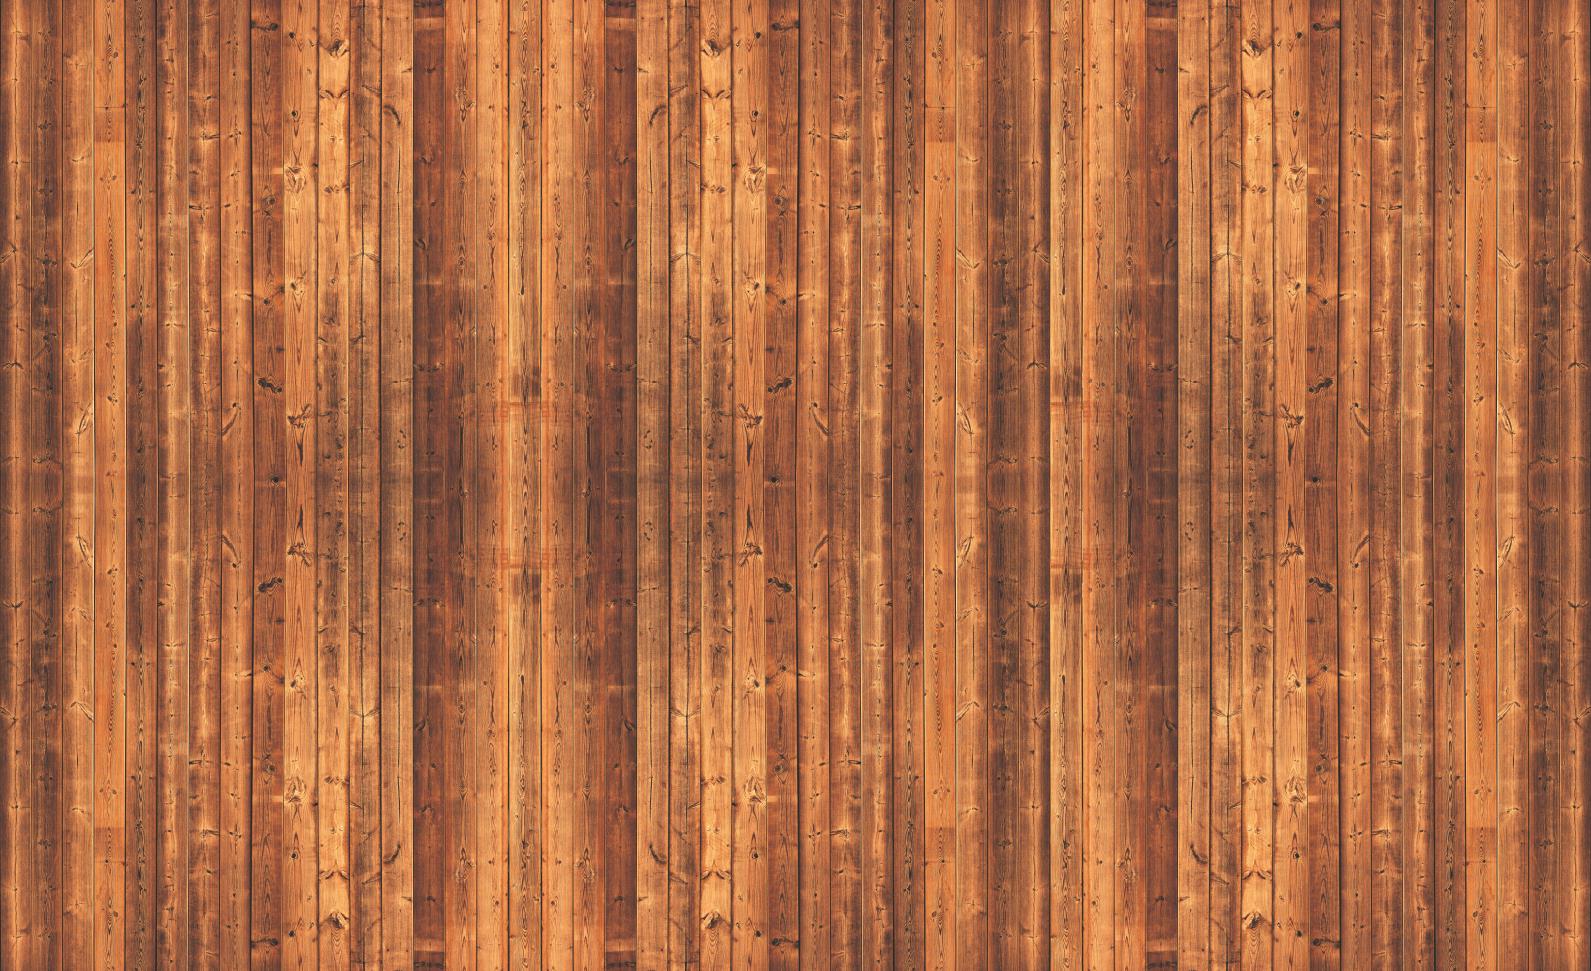 About Wood Planks Texture Photo Wallpaper Wall Mural Room 1091p